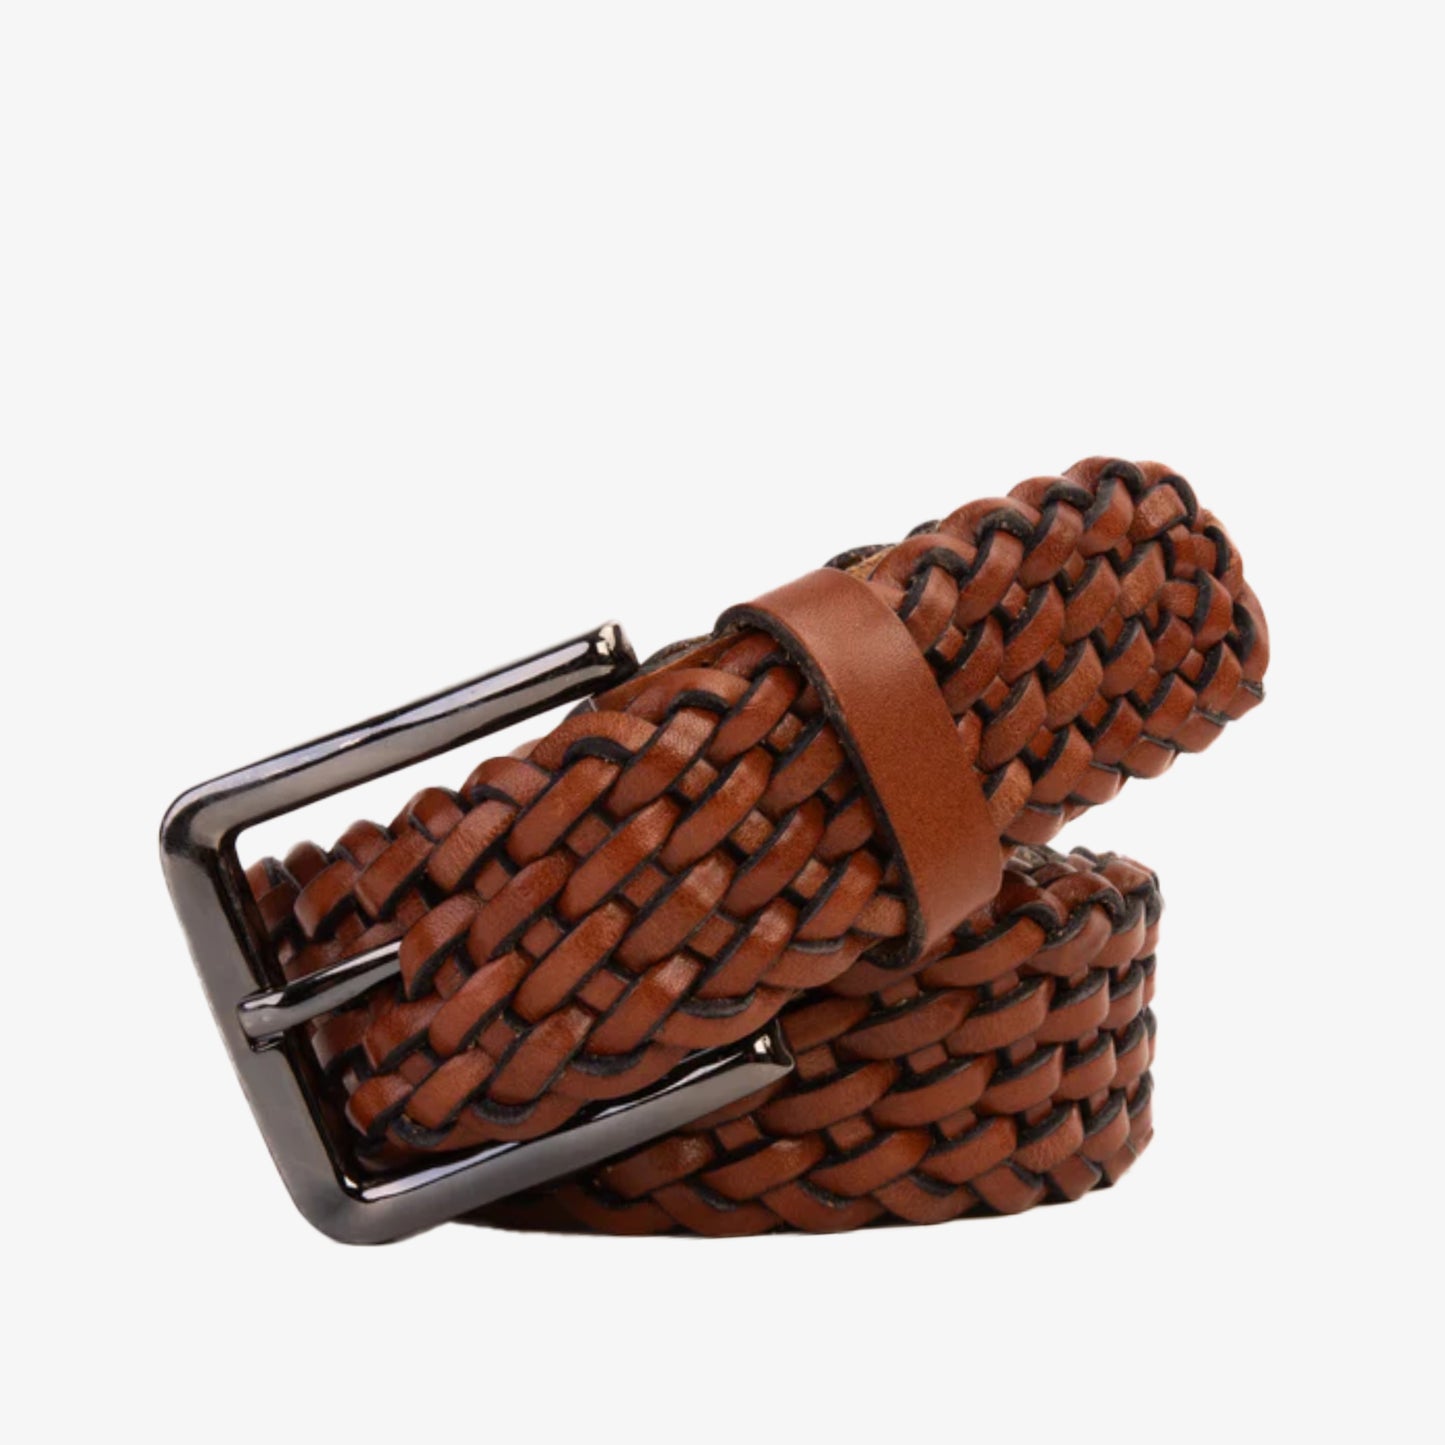 The Grand Woven Tan Color Leather Belt